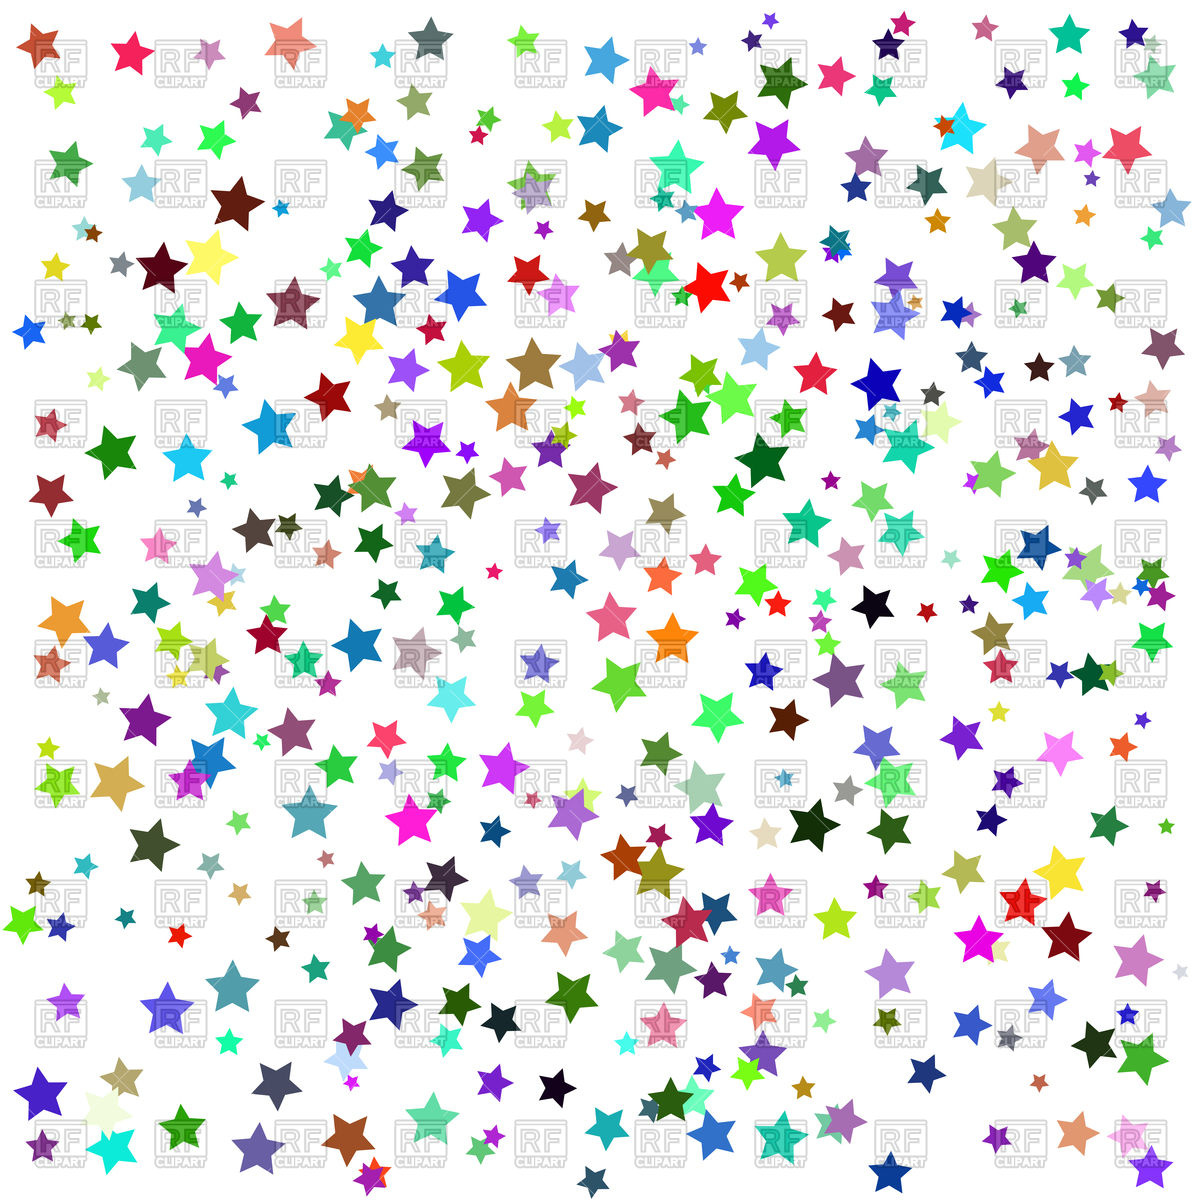 Star background clipart 